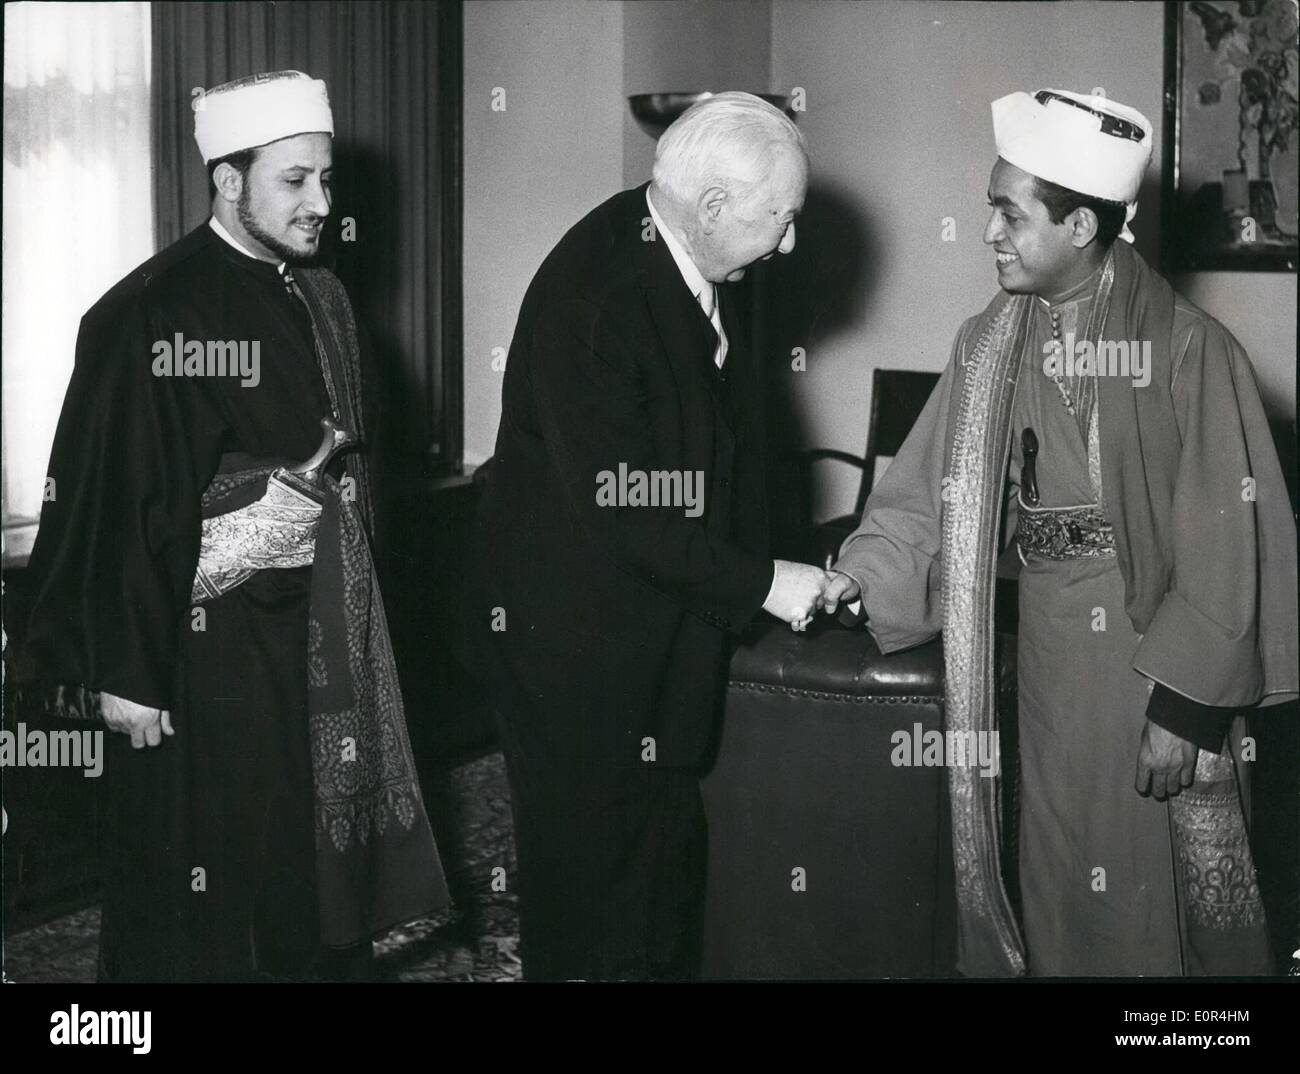 Mar. 03, 1958 - Prince Saif ul-Islam Abdurrahman at March 24, 1958 was making his courtesy visit to the Federal President. The Prince is a brother of the King of Yemen and is intending to stay for two years in Germany, in order to study politics and economics. Photo shows: from left to right side: the charge d'affaires of Yemen in Bonn Abadany (Abadany), the Federal President professor Theodor heuss (professor Theodor heuss) and pinrce Saif ill-Islam Abdurrahman. Stock Photo